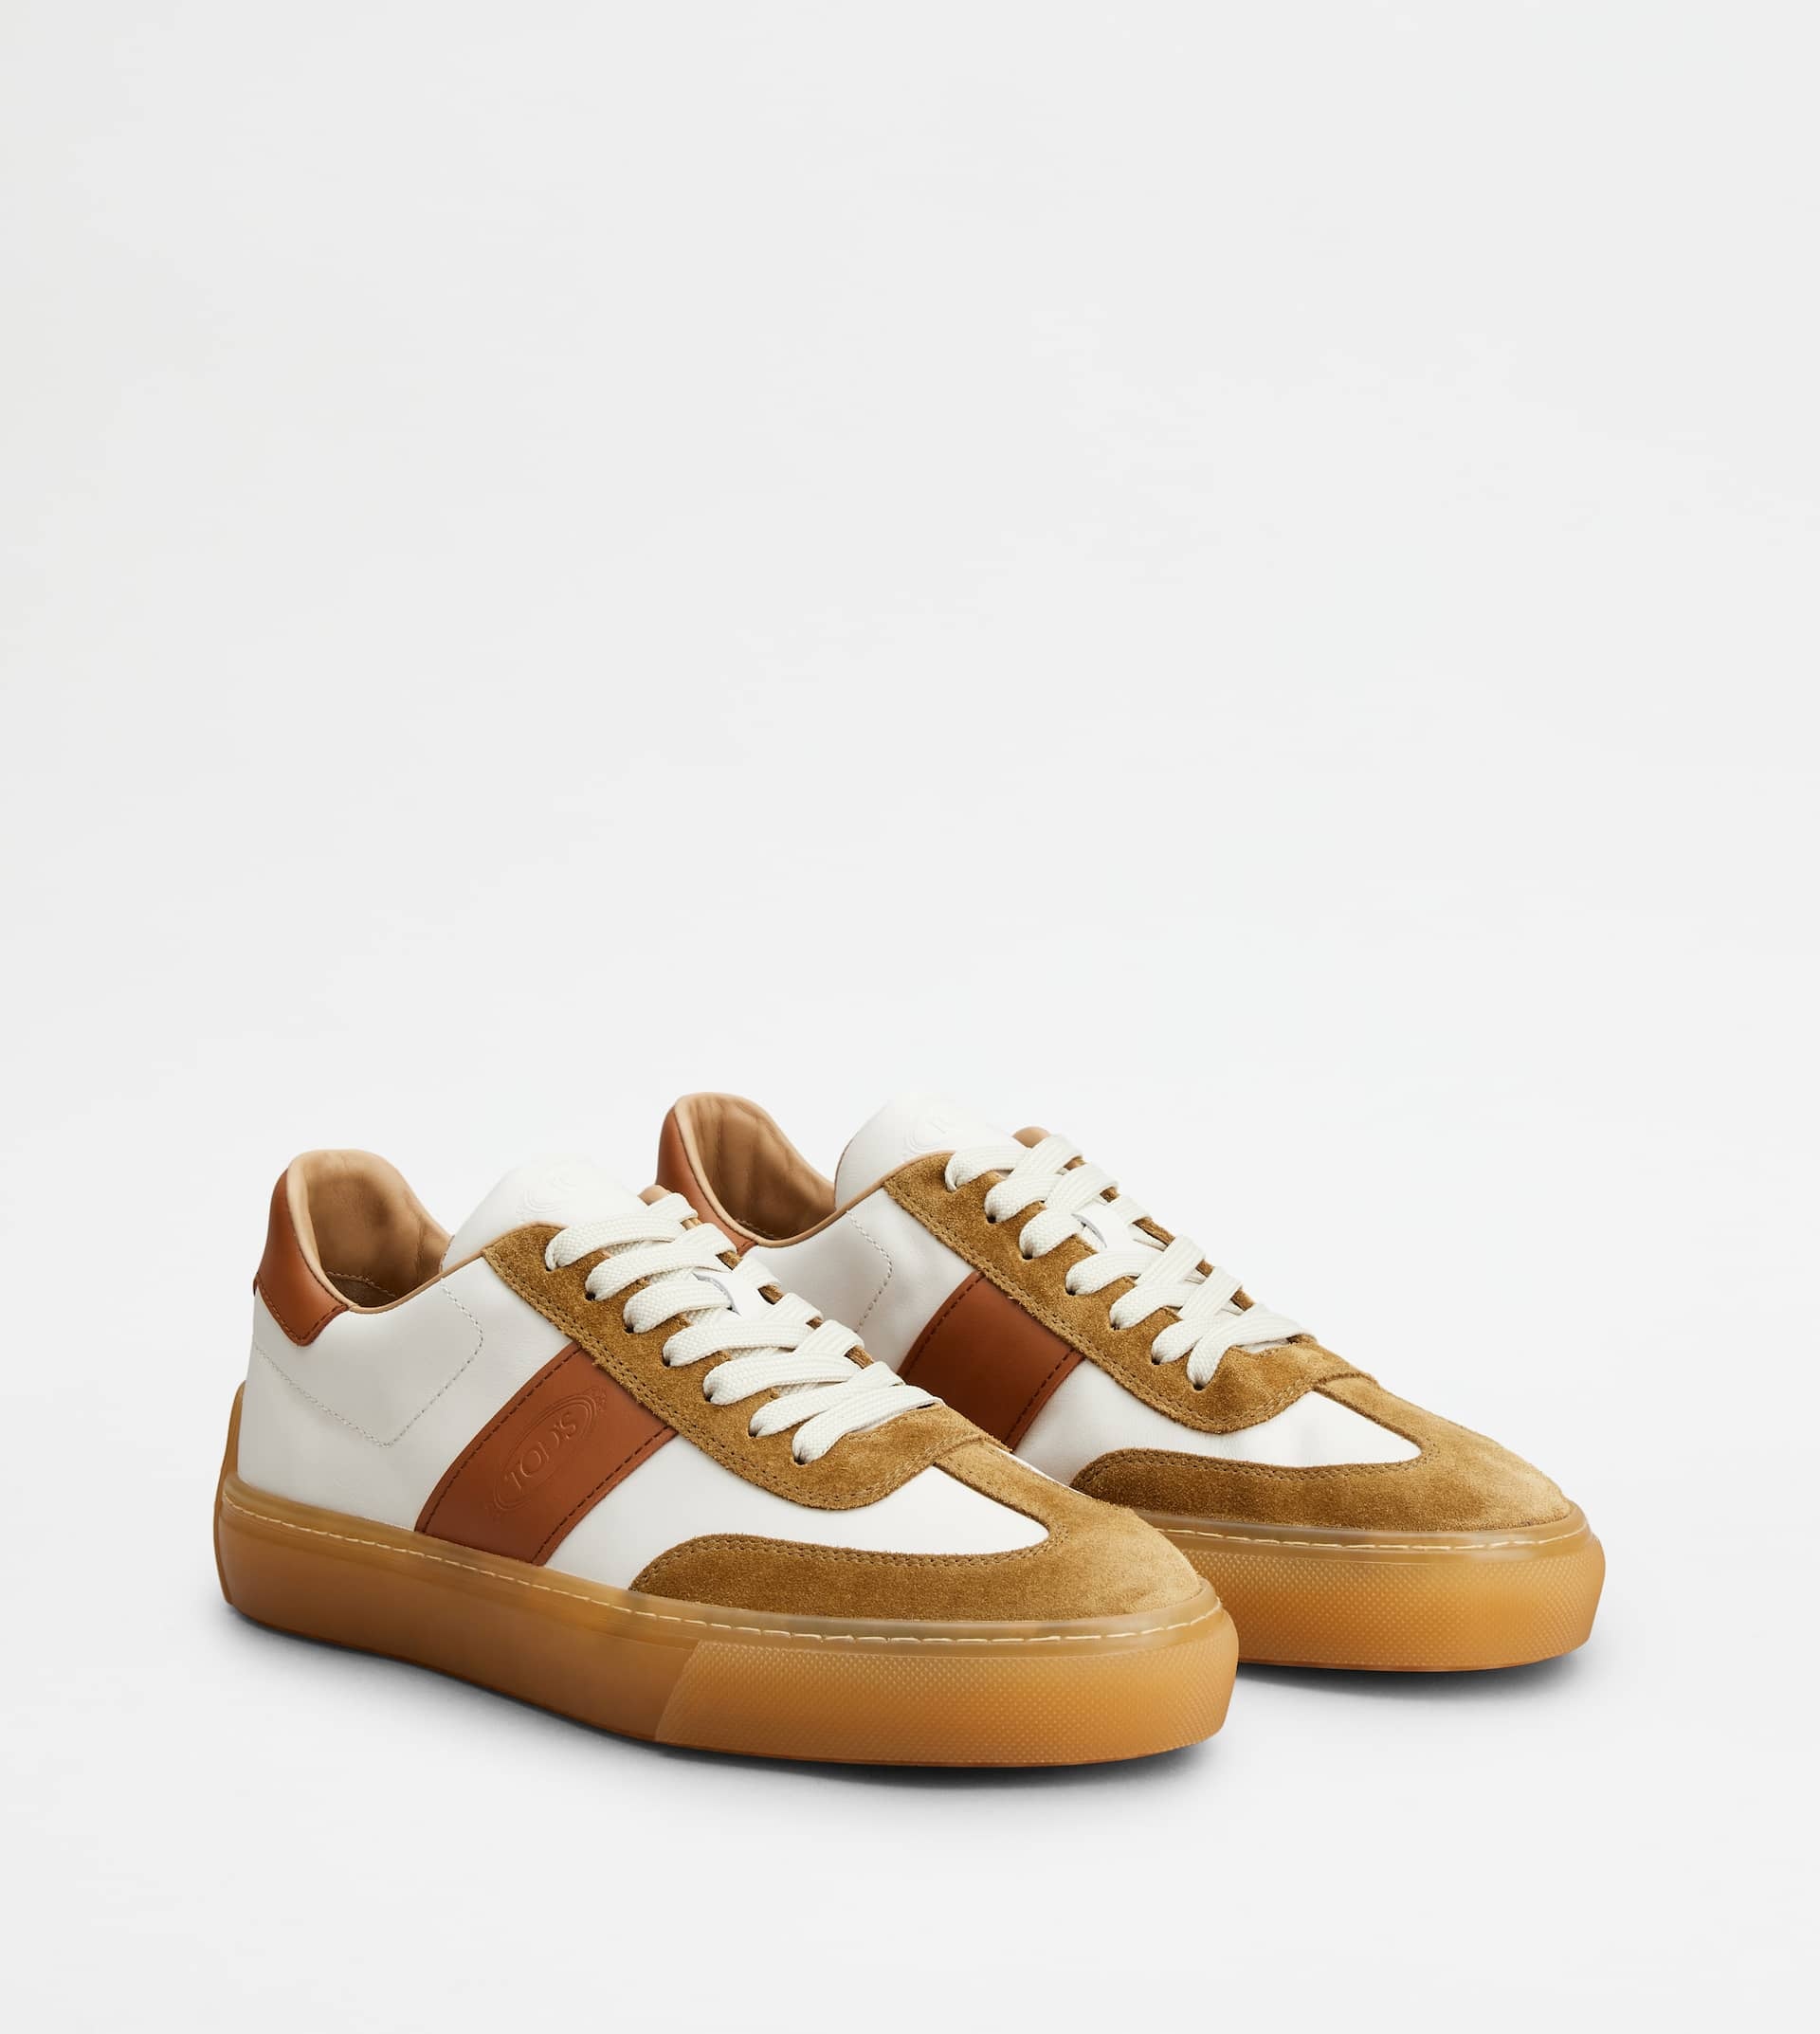 SNEAKERS IN LEATHER - WHITE, BROWN, PINK - 3